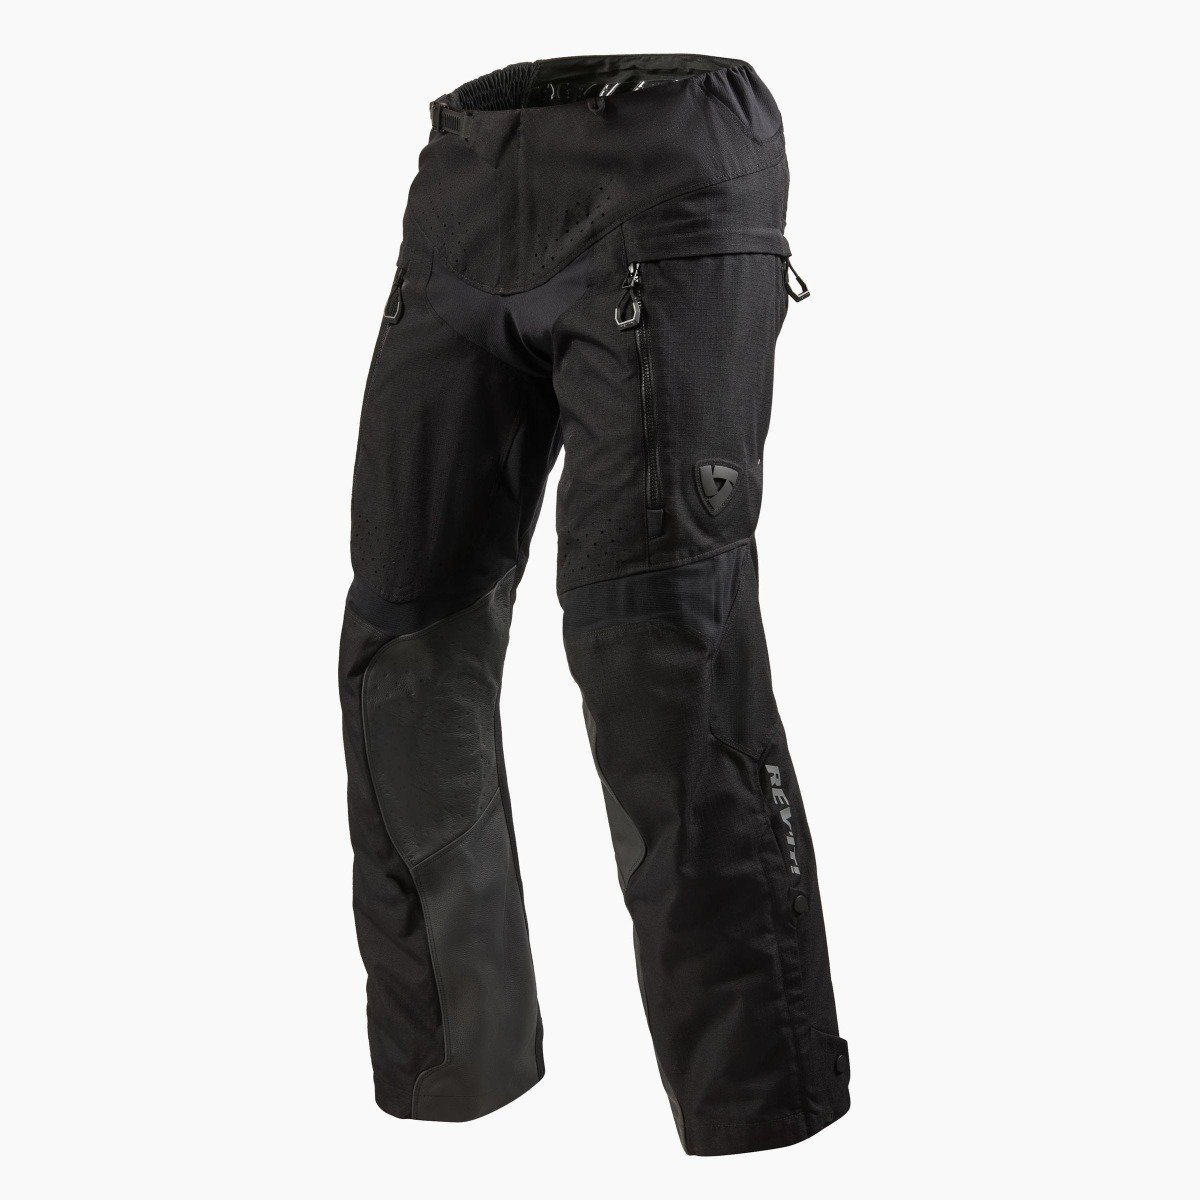 Image of REV'IT! Continent Short Black Motorcycle Pants Size M ID 8700001297080